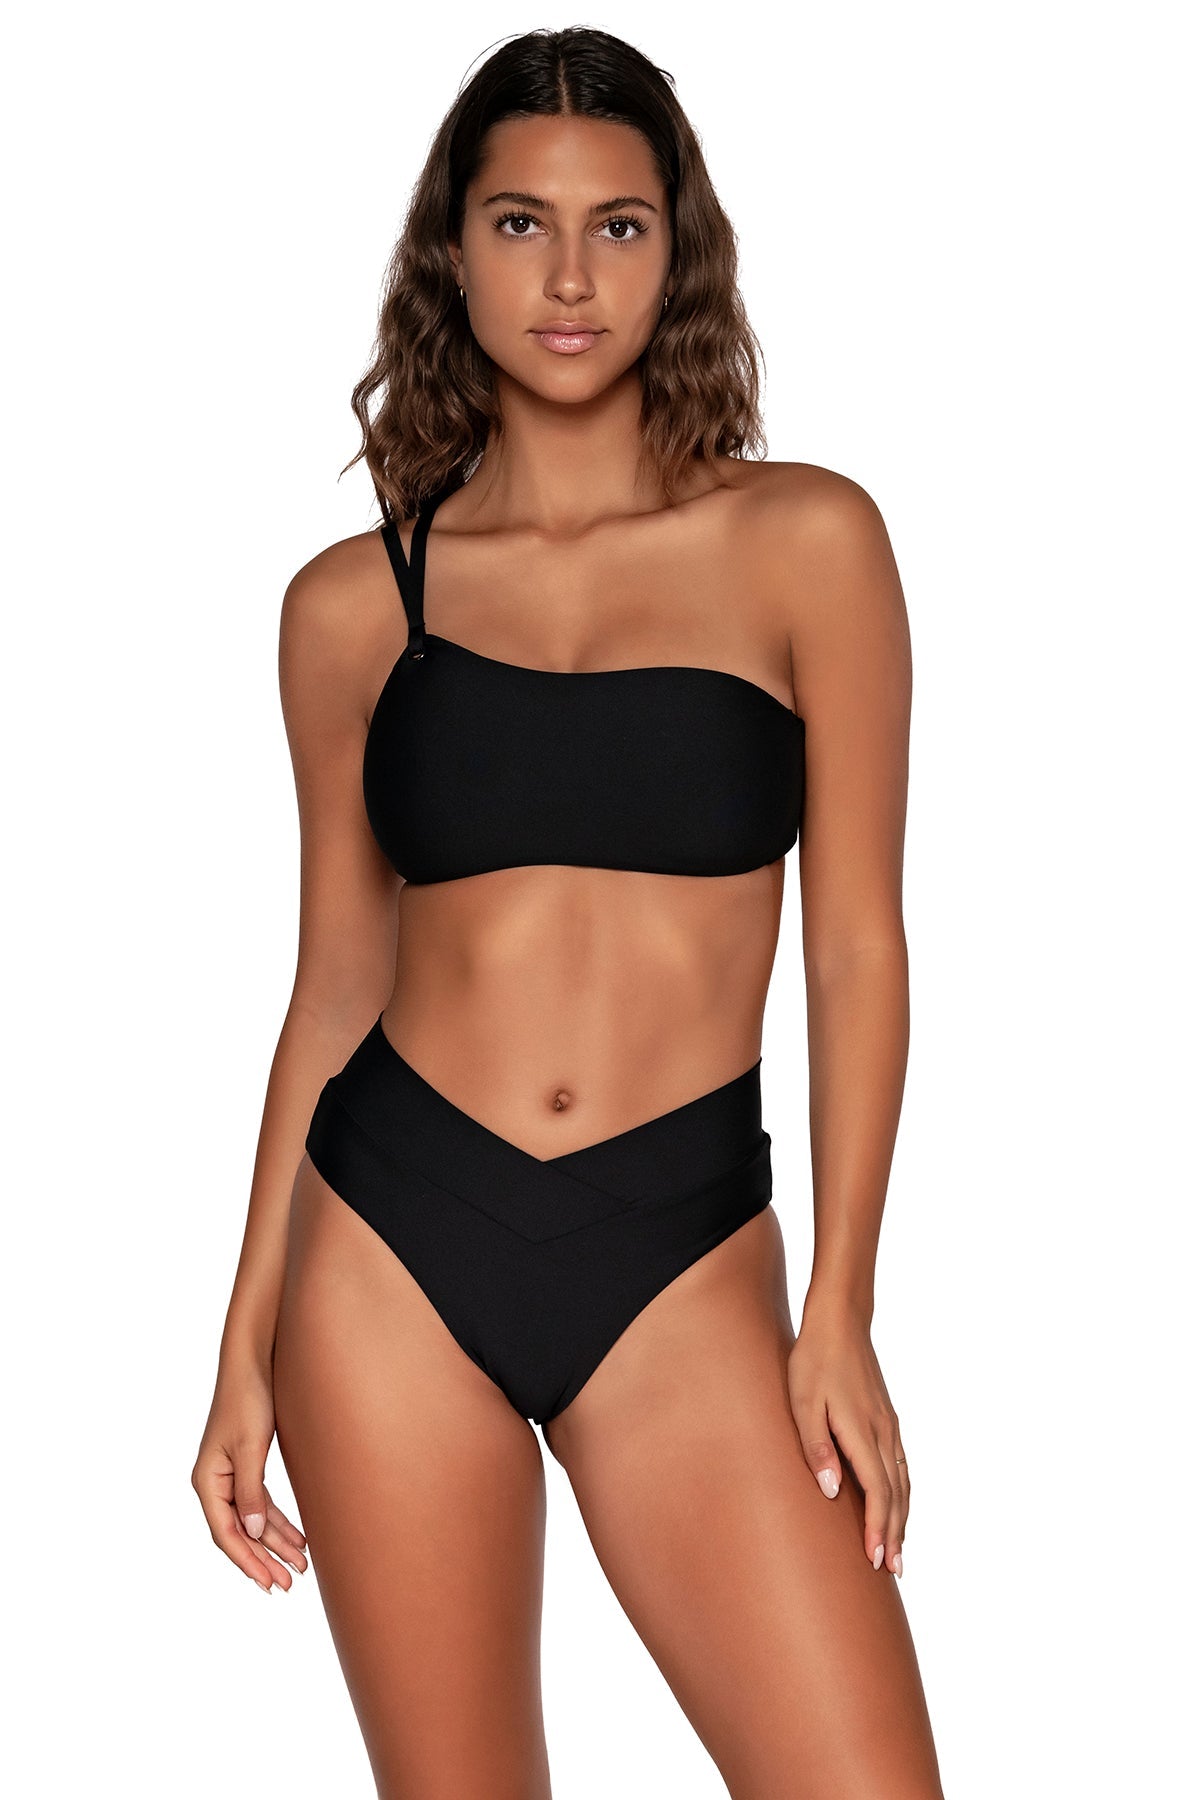 Swim Systems &quot;Brands,Swimwear&quot; XS / BLACK / T521 Swim Systems Black Reese One Shoulder Top